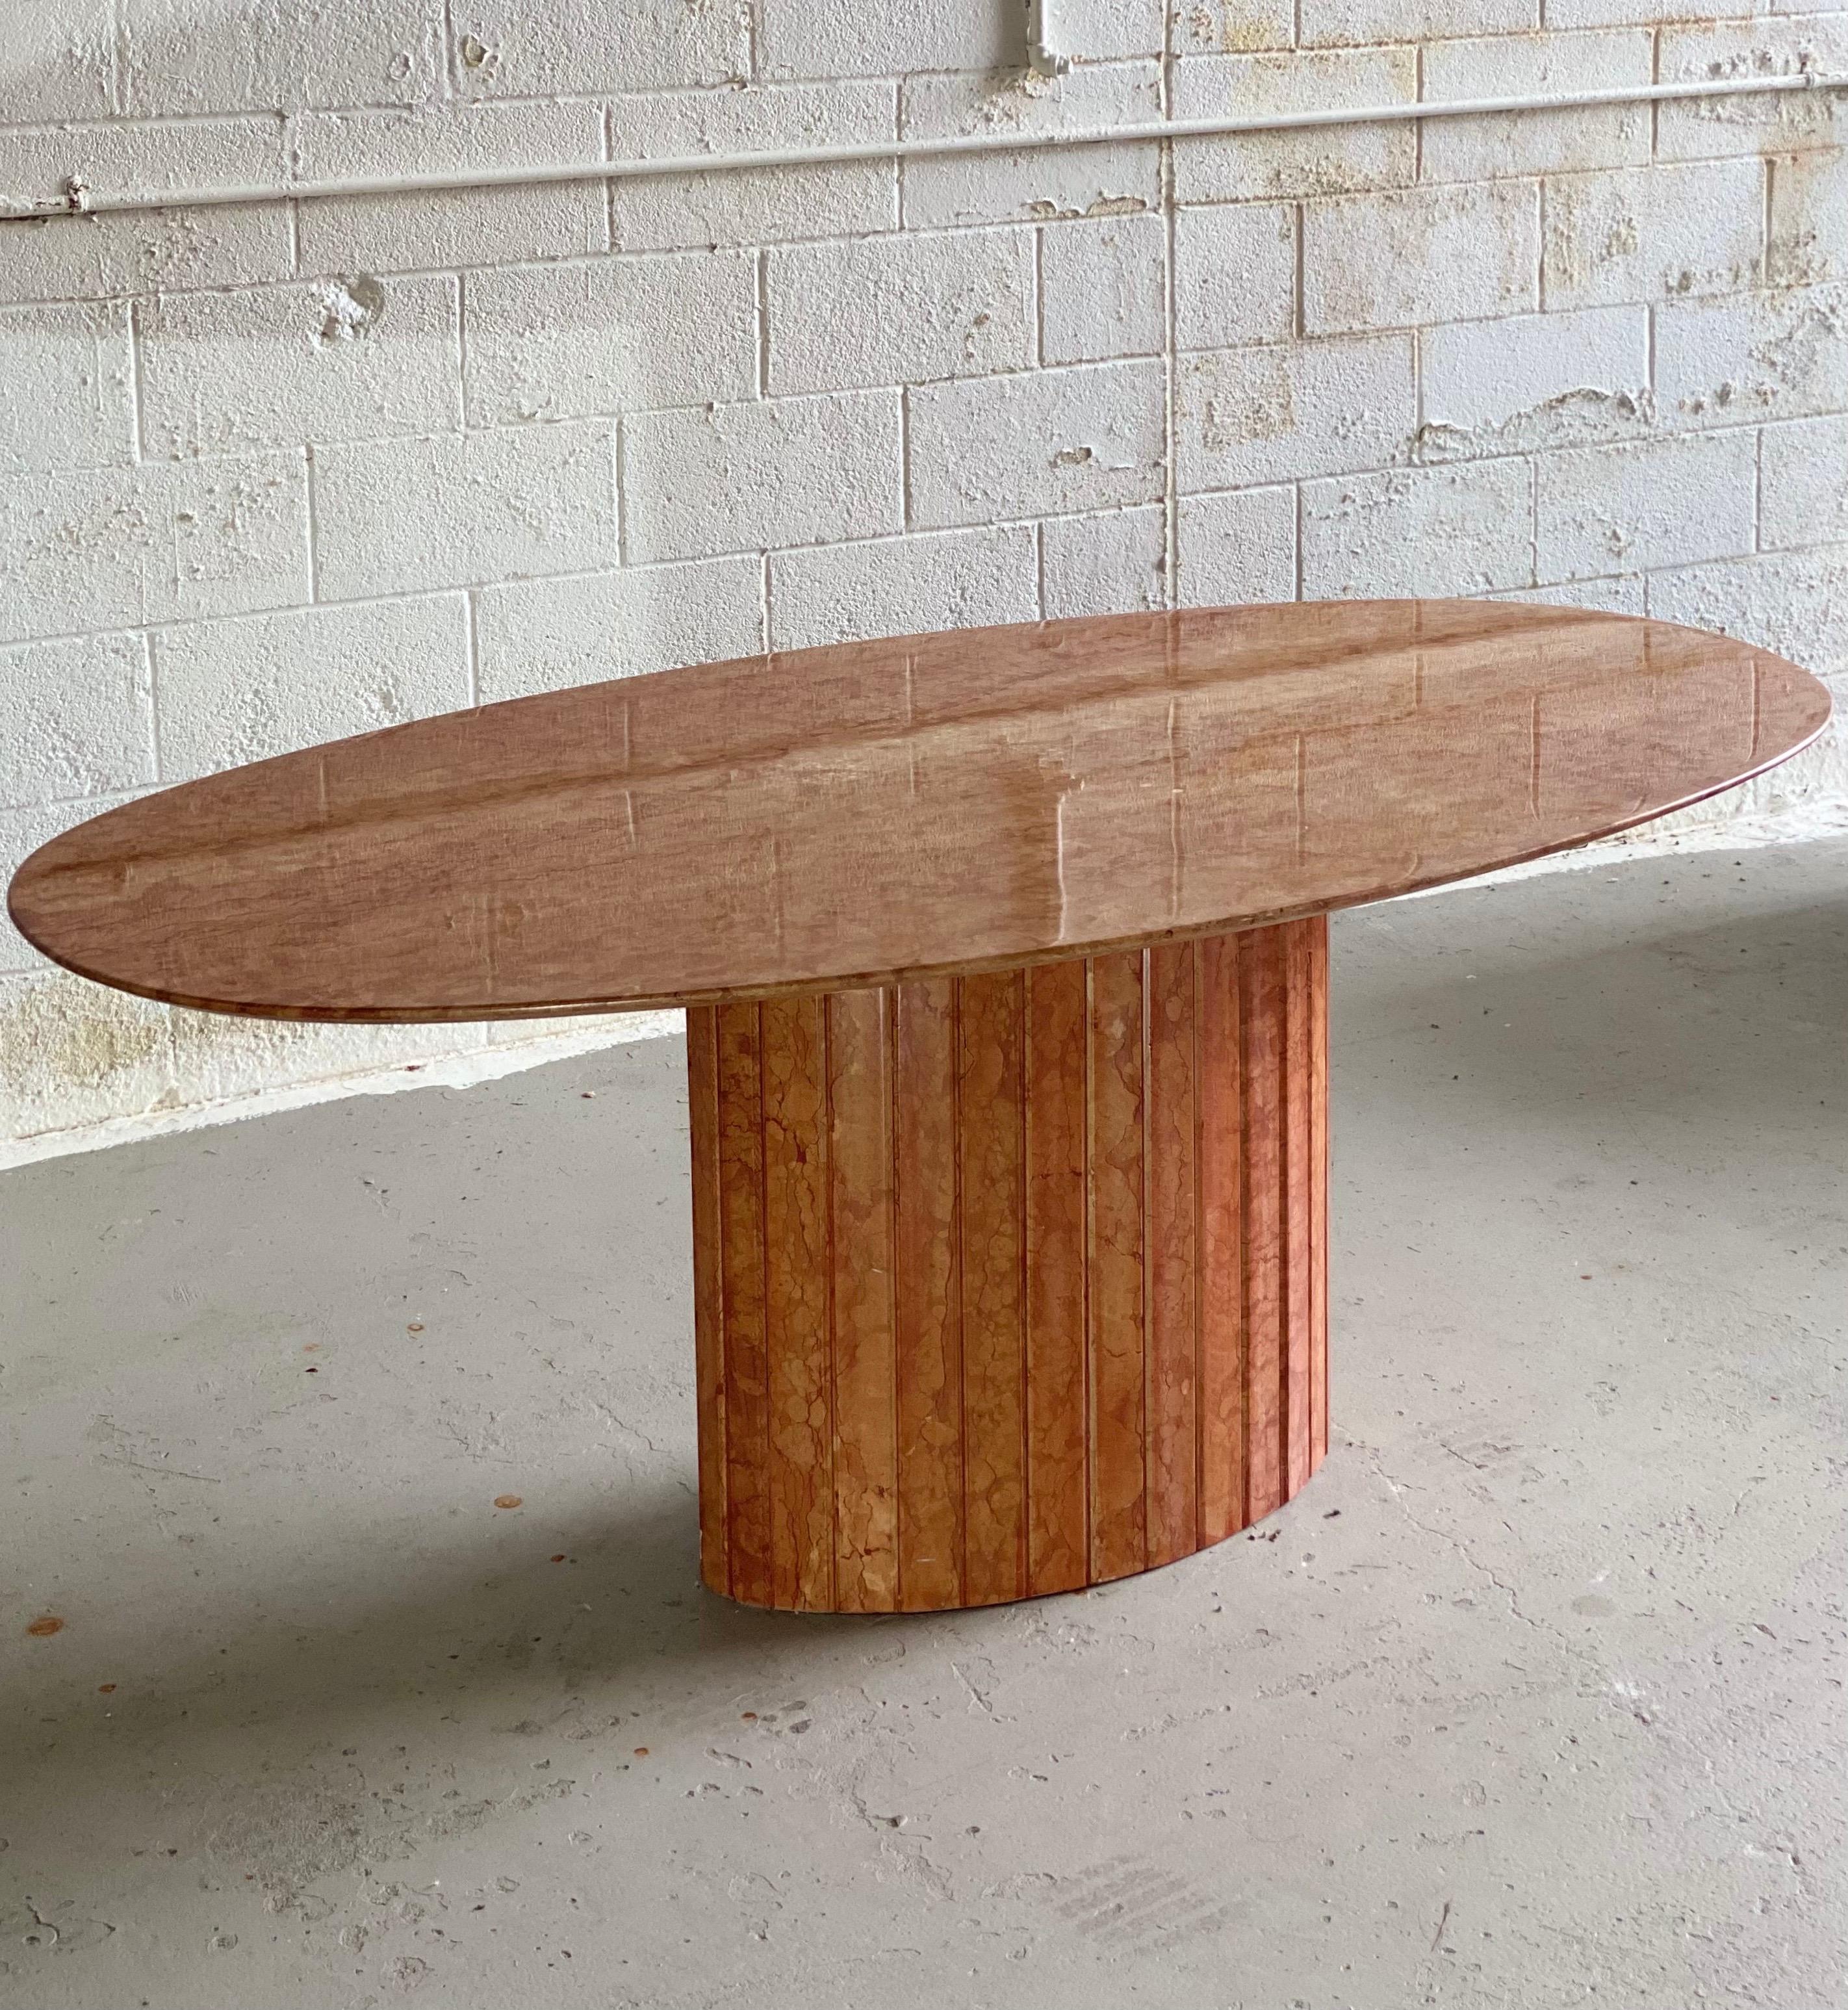 We are very pleased to offer a sculptural, lacquered marble dining table, made in Italy, circa the 1970s. This timeless piece poses a visual effect from every point of view and showcases the stone’s natural beauty of its veins. Its simple form and